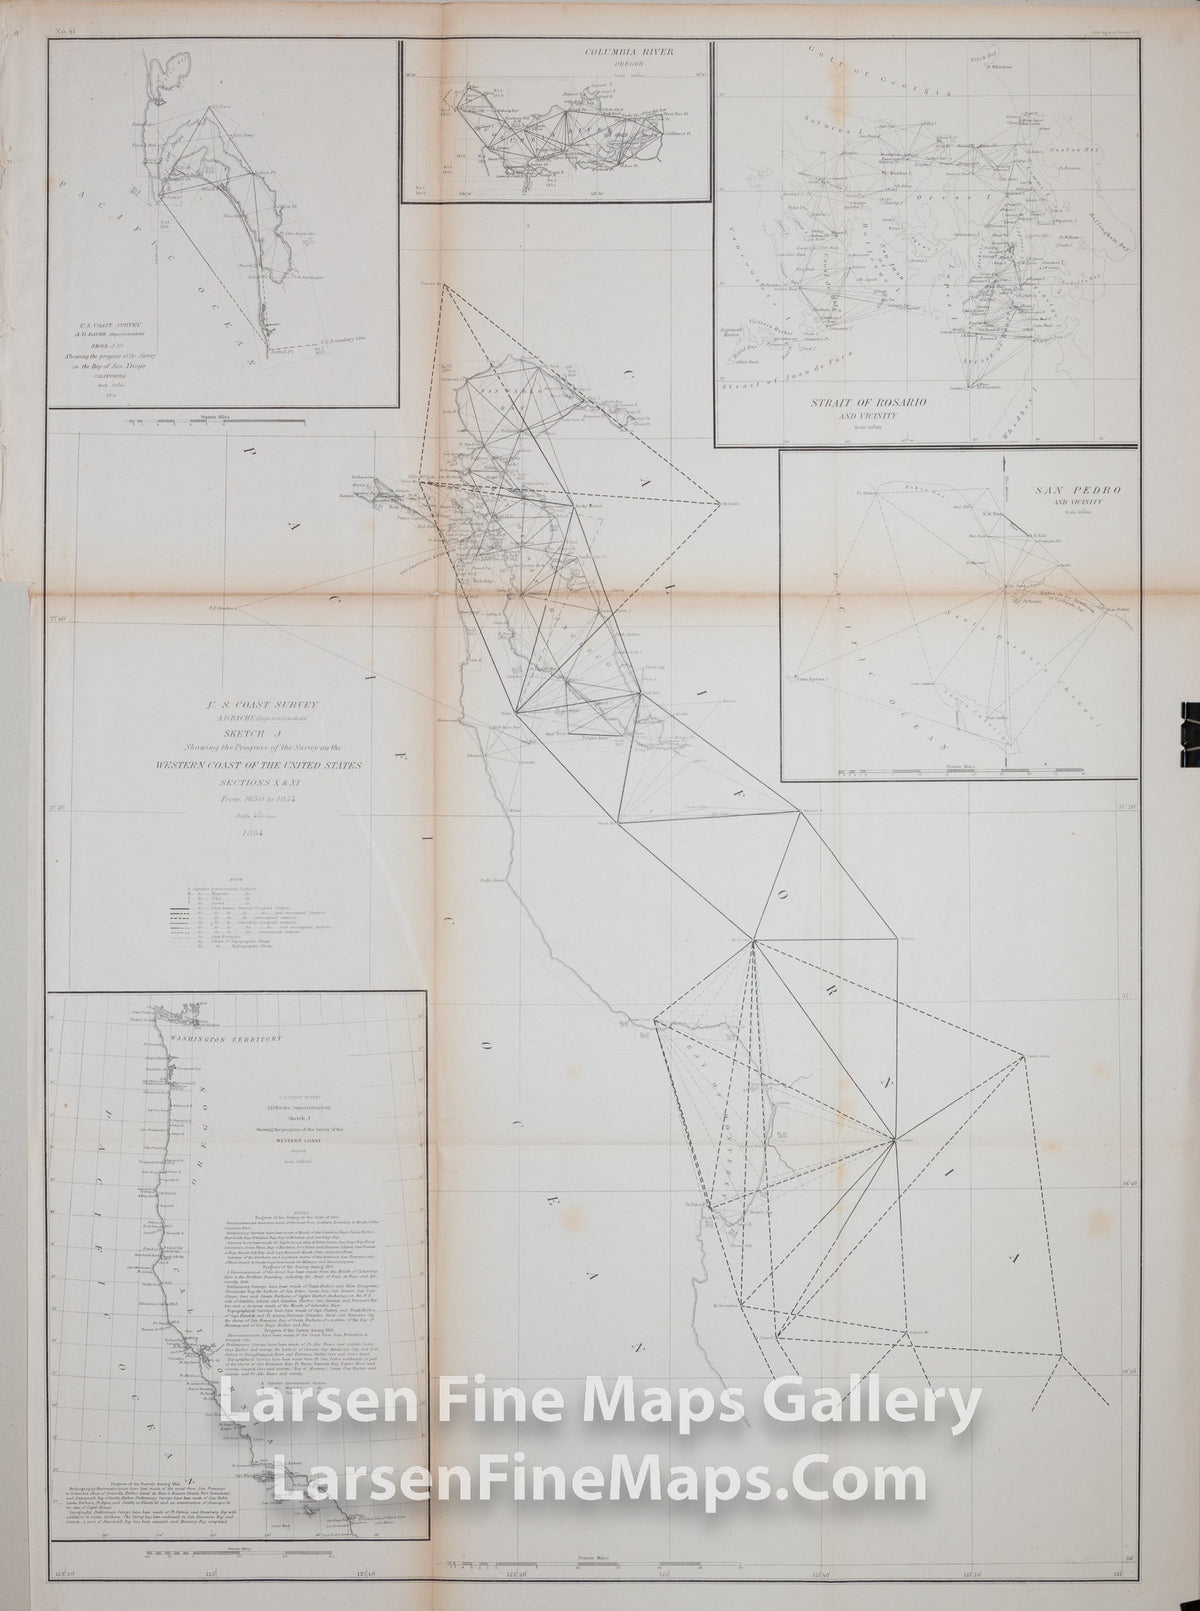 Sketch J Showing the Progress of the Survey on the Western Coast of the United States Sections X & XI From 1850 to 1854